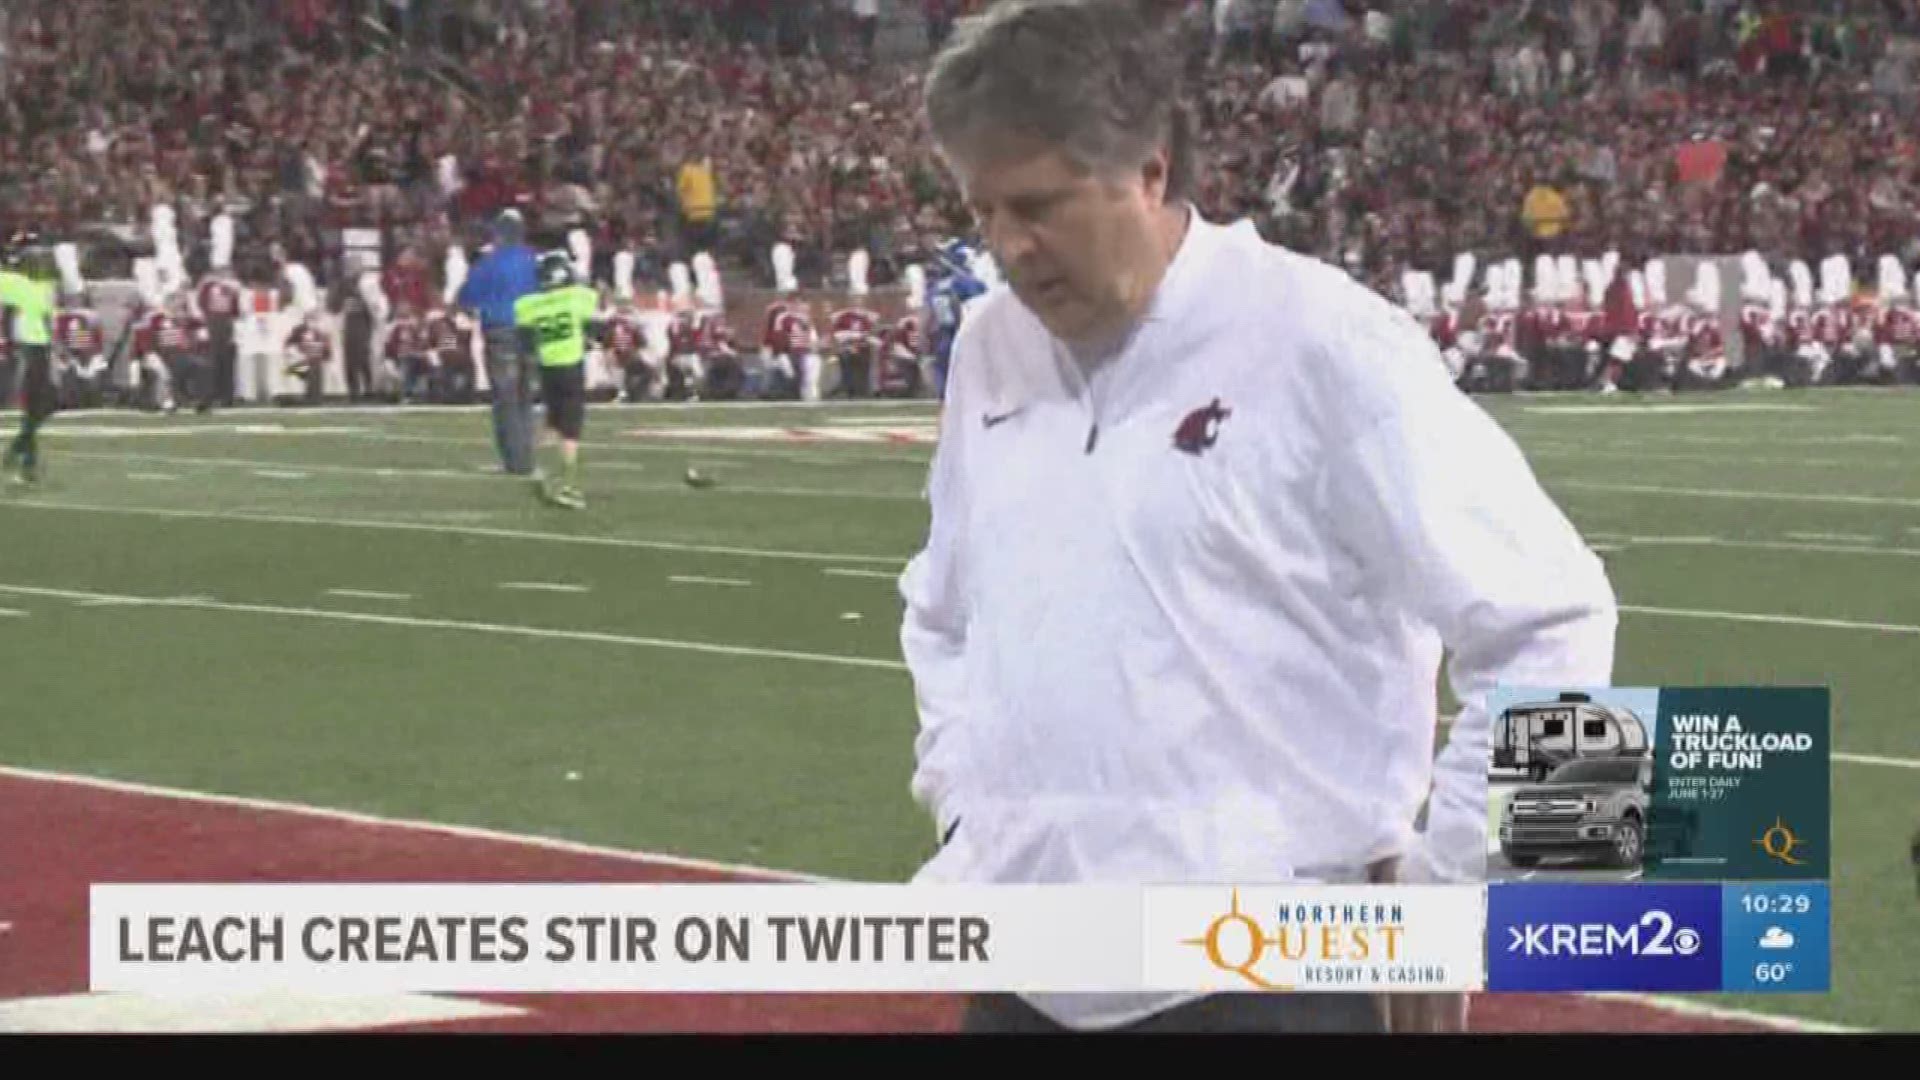 KREM2's Evan Closky breaks down what happened with Mike Leach on twitter and Washington State's response.